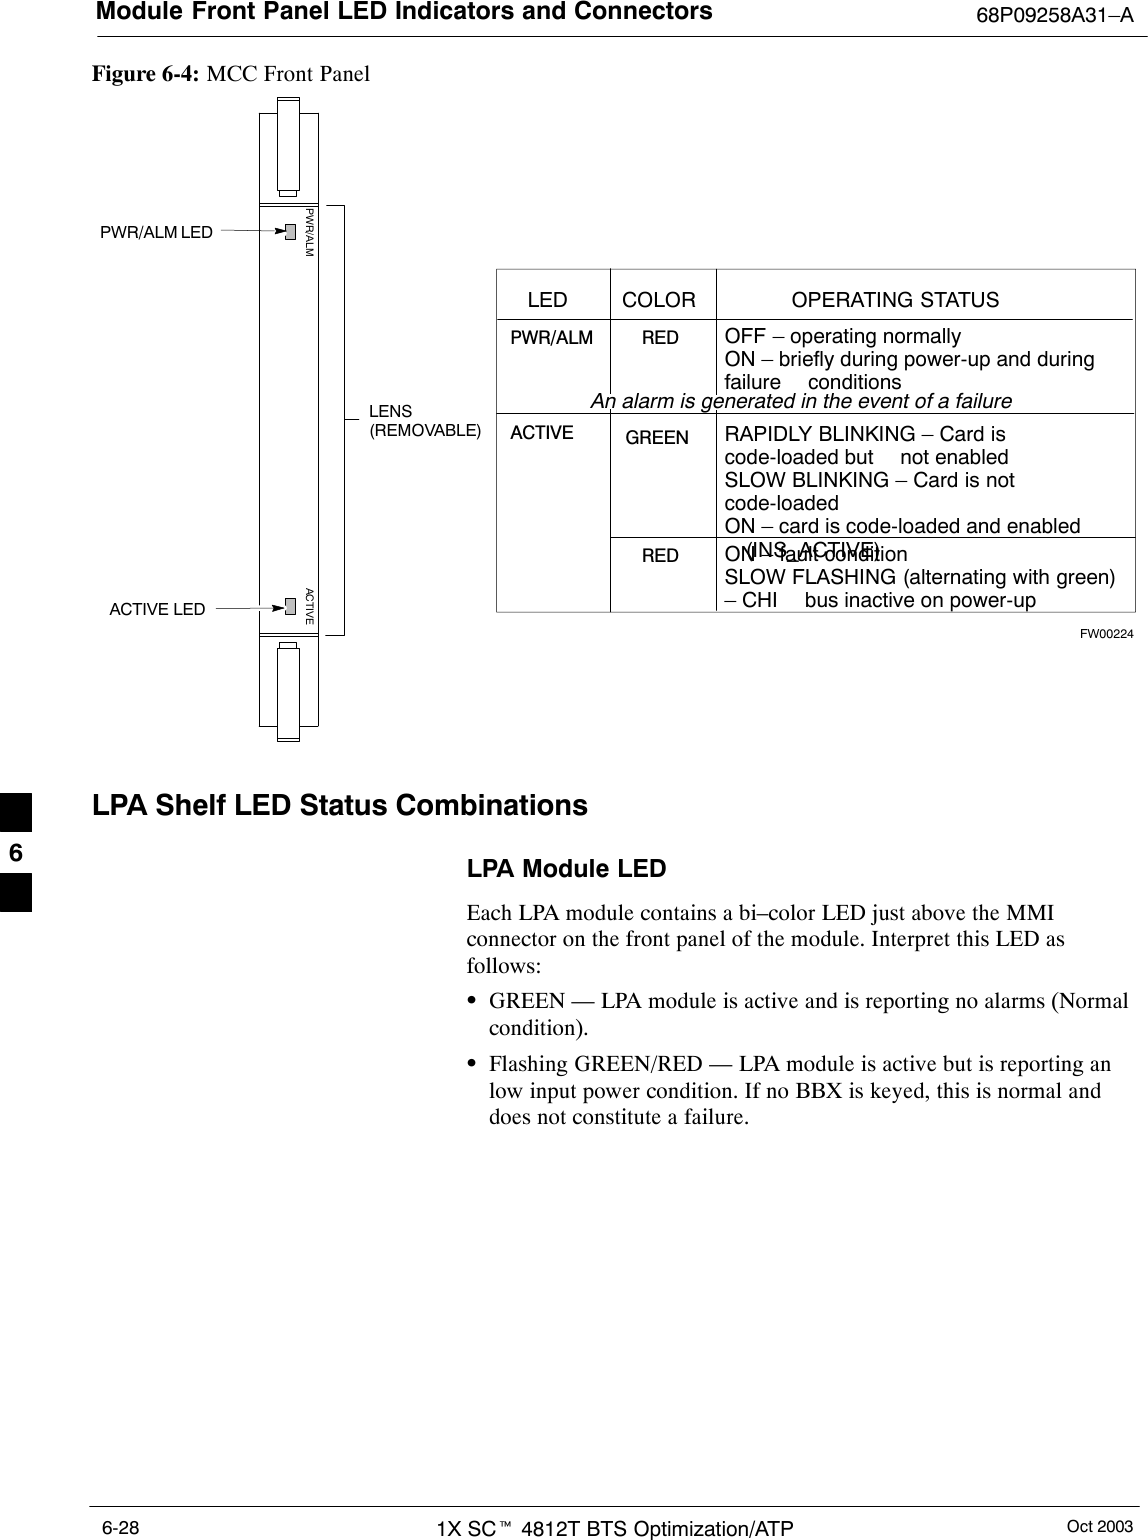 Module Front Panel LED Indicators and Connectors 68P09258A31–AOct 20031X SCt 4812T BTS Optimization/ATP6-28Figure 6-4: MCC Front PanelPWR/ALM LEDLENS(REMOVABLE)ACTIVE LEDPWR/ALM ACTIVEPWR/ALMOFF – operating normallyON – briefly during power-up and duringfailure conditionsACTIVELED OPERATING STATUSRAPIDLY BLINKING – Card iscode-loaded but  not enabledSLOW BLINKING – Card is notcode-loadedON – card is code-loaded and enabled(INS_ACTIVE)COLORGREENREDREDON – fault conditionSLOW FLASHING (alternating with green)– CHI  bus inactive on power-upAn alarm is generated in the event of a failureFW00224LPA Shelf LED Status CombinationsLPA Module LEDEach LPA module contains a bi–color LED just above the MMIconnector on the front panel of the module. Interpret this LED asfollows:SGREEN — LPA module is active and is reporting no alarms (Normalcondition).SFlashing GREEN/RED — LPA module is active but is reporting anlow input power condition. If no BBX is keyed, this is normal anddoes not constitute a failure.6